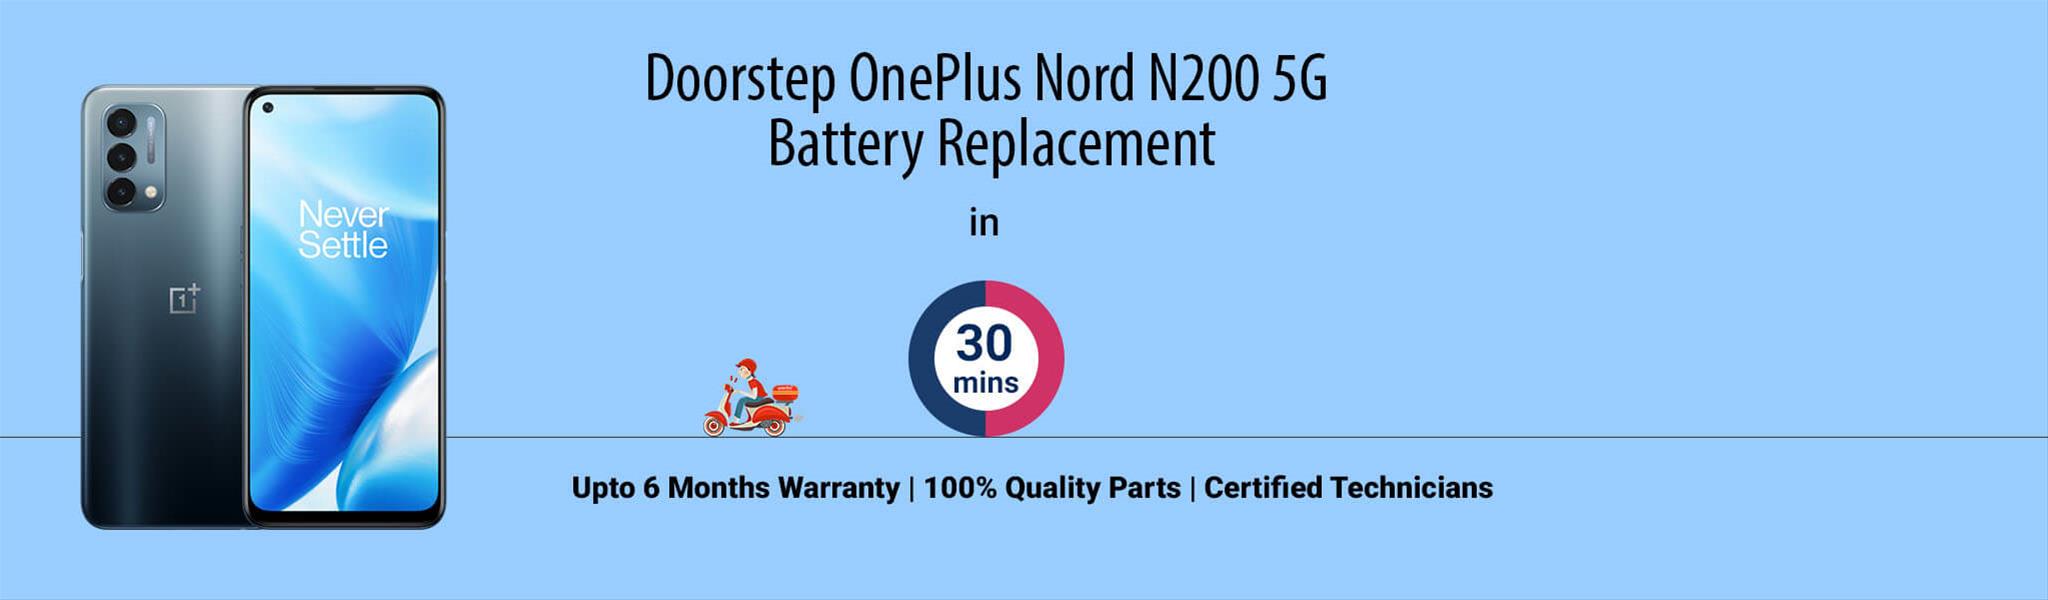 oneplus-nord-n200-5g-battery-replacement.jpg